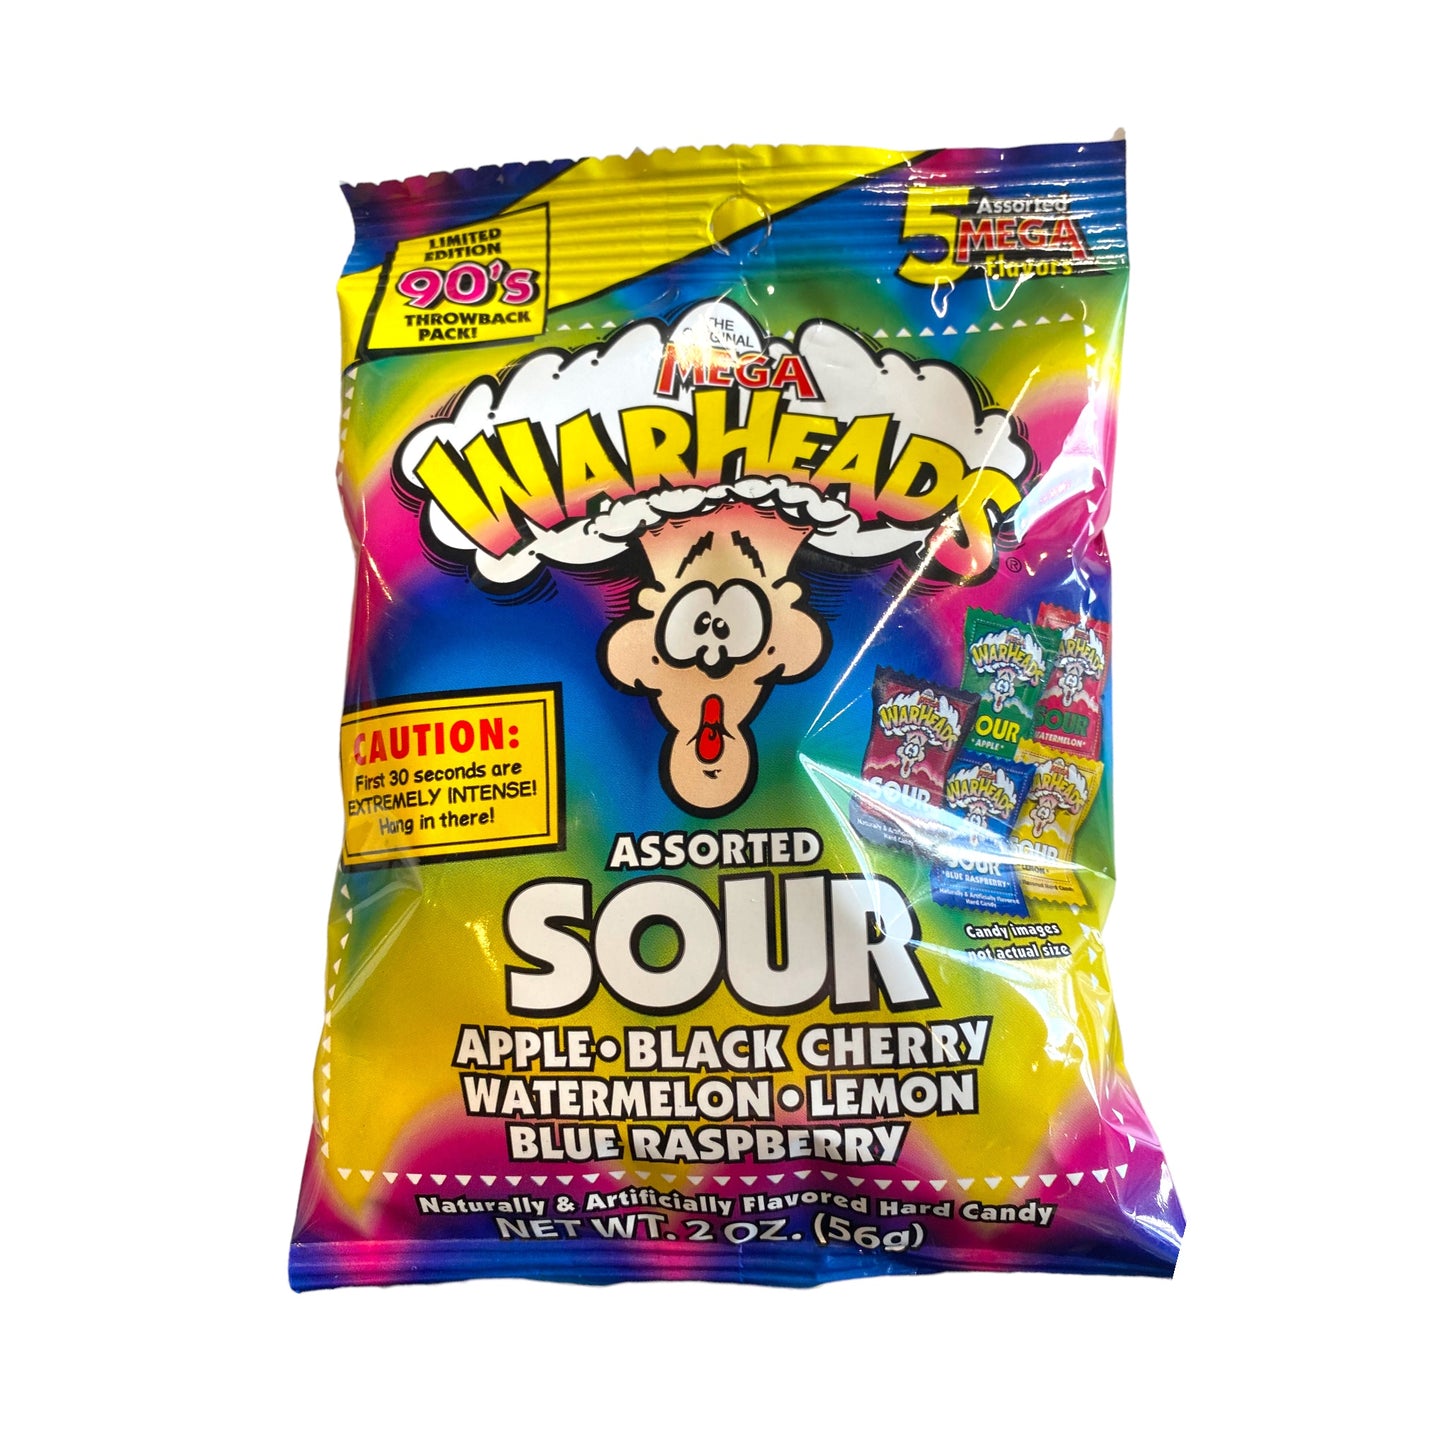 Warheads Extreme Sour Hard Candy - 2oz (56g)